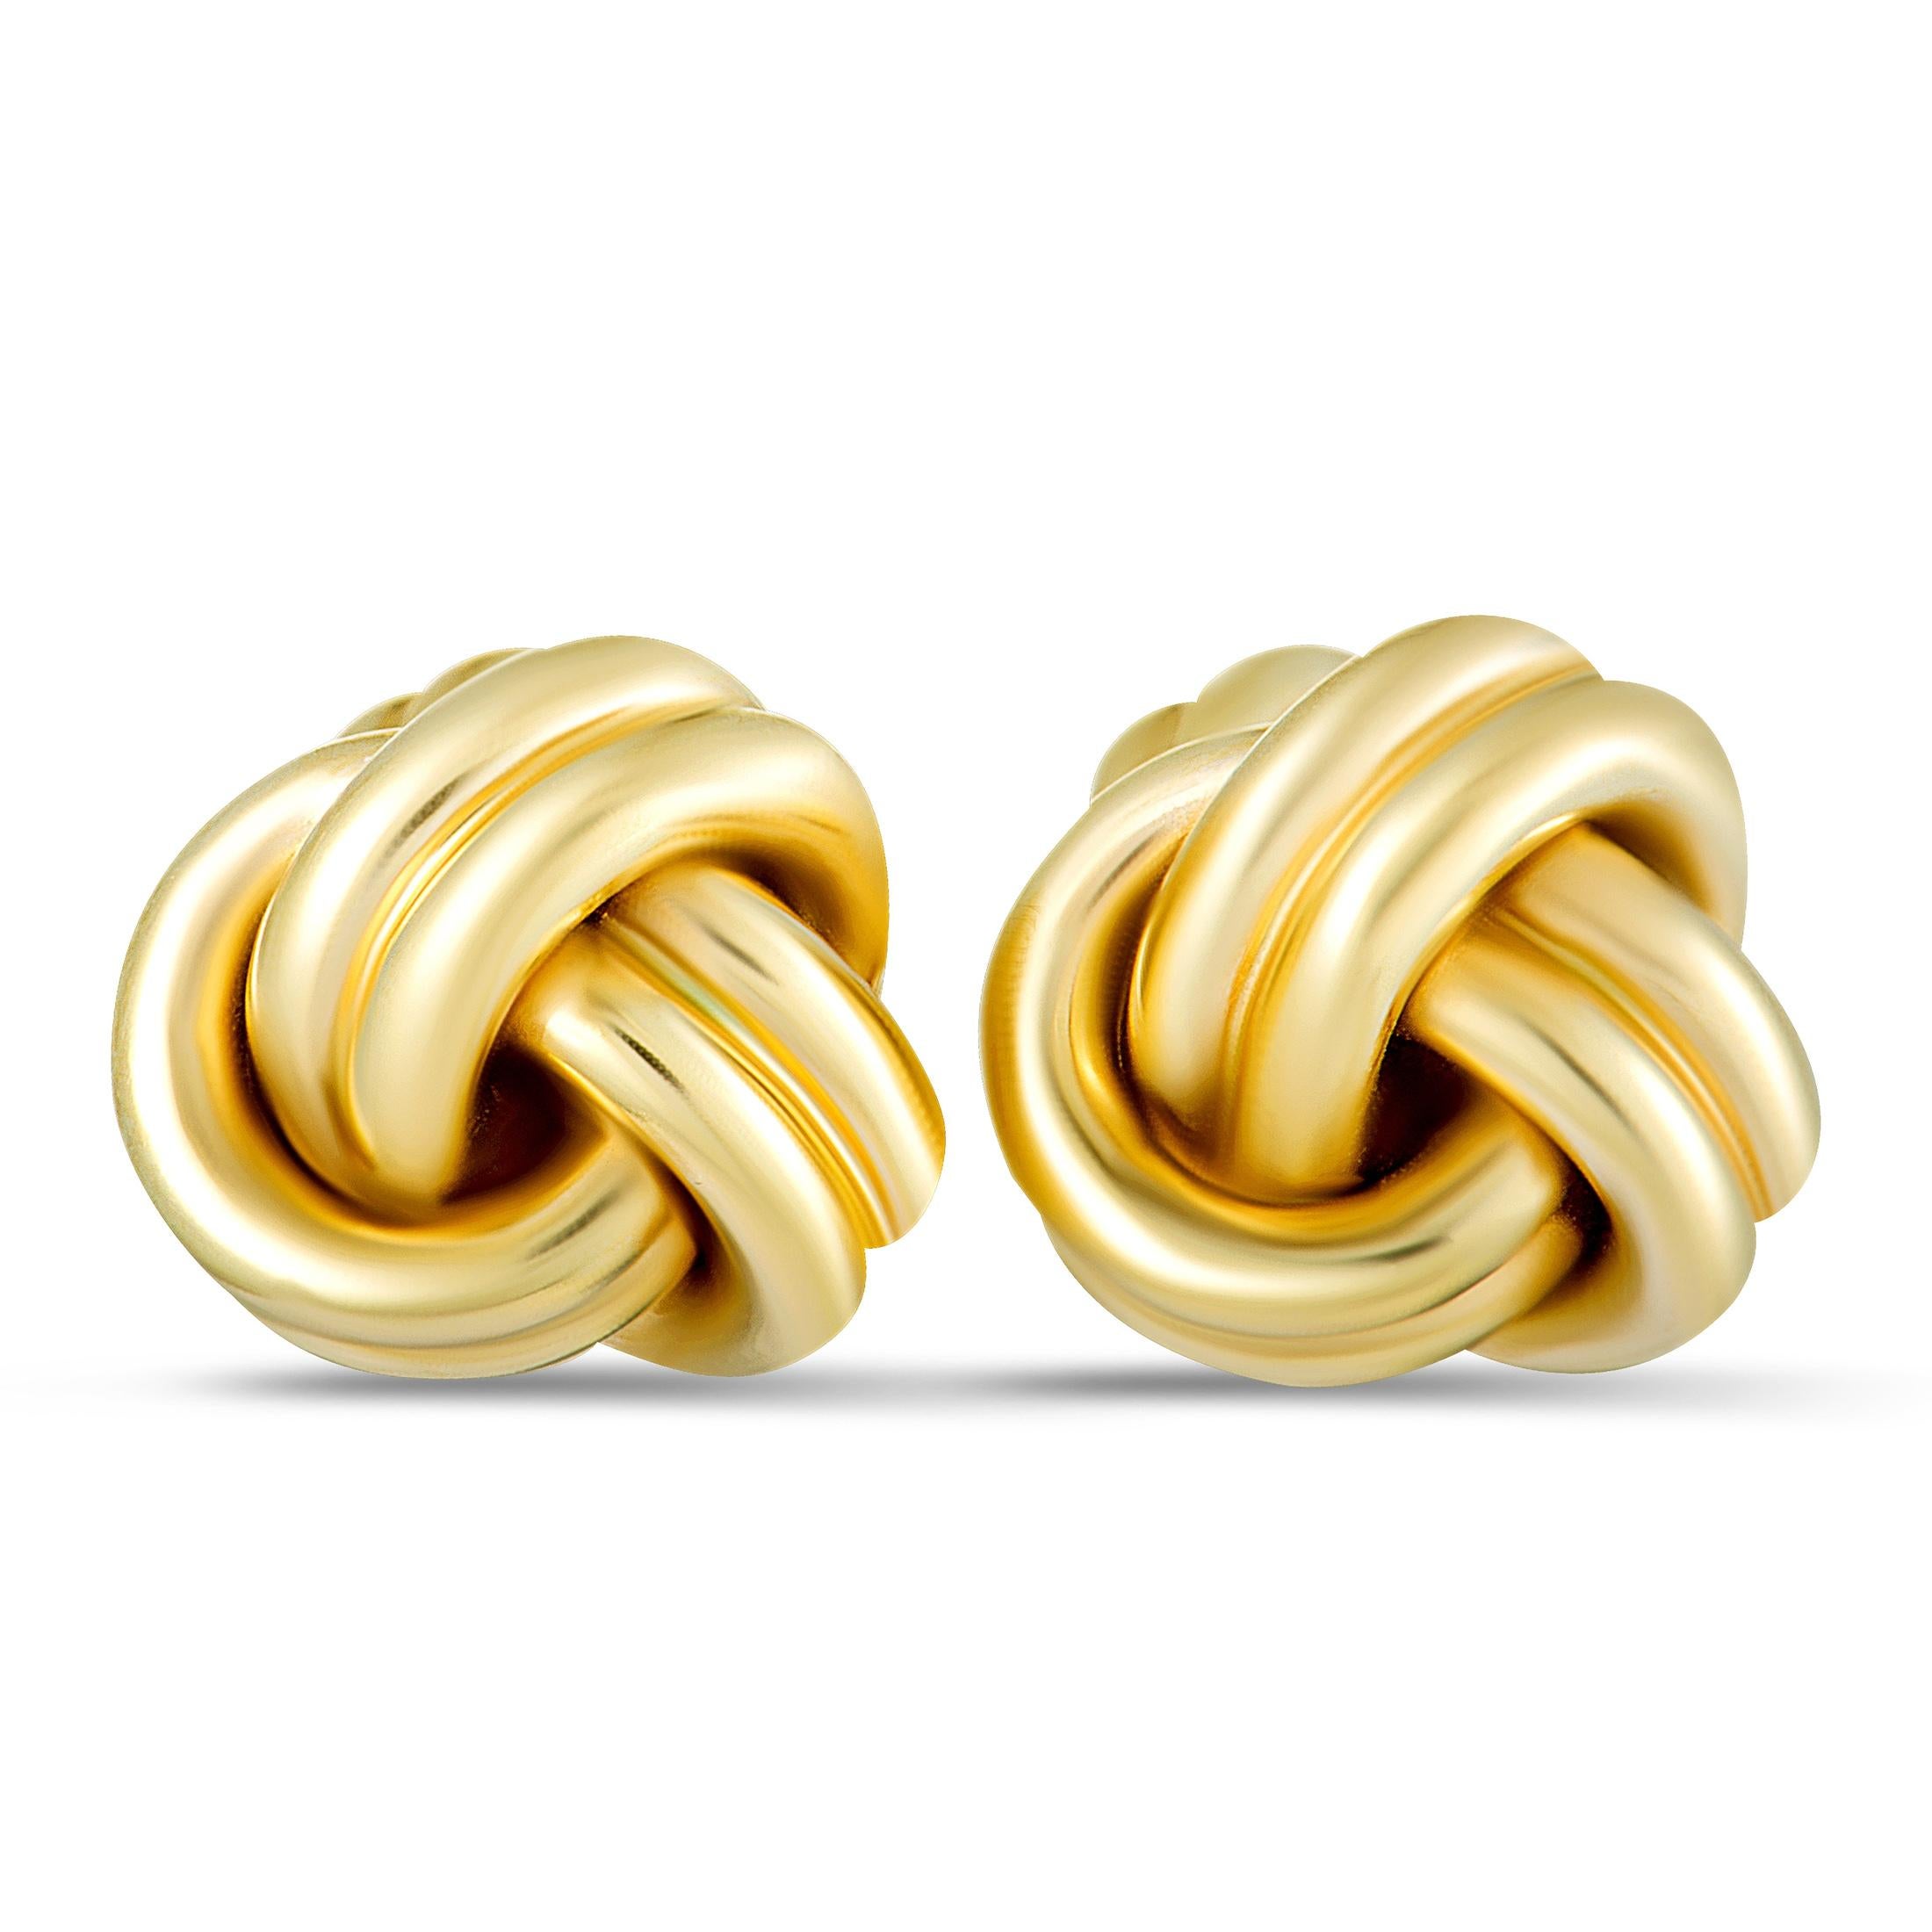 This exquisite pair of cufflinks will add a refined touch to your attires thanks to the splendidly understated design and the exceptional craftsmanship quality. The cufflinks are presented by Tiffany & Co. and the pair is made of classy 14K yellow